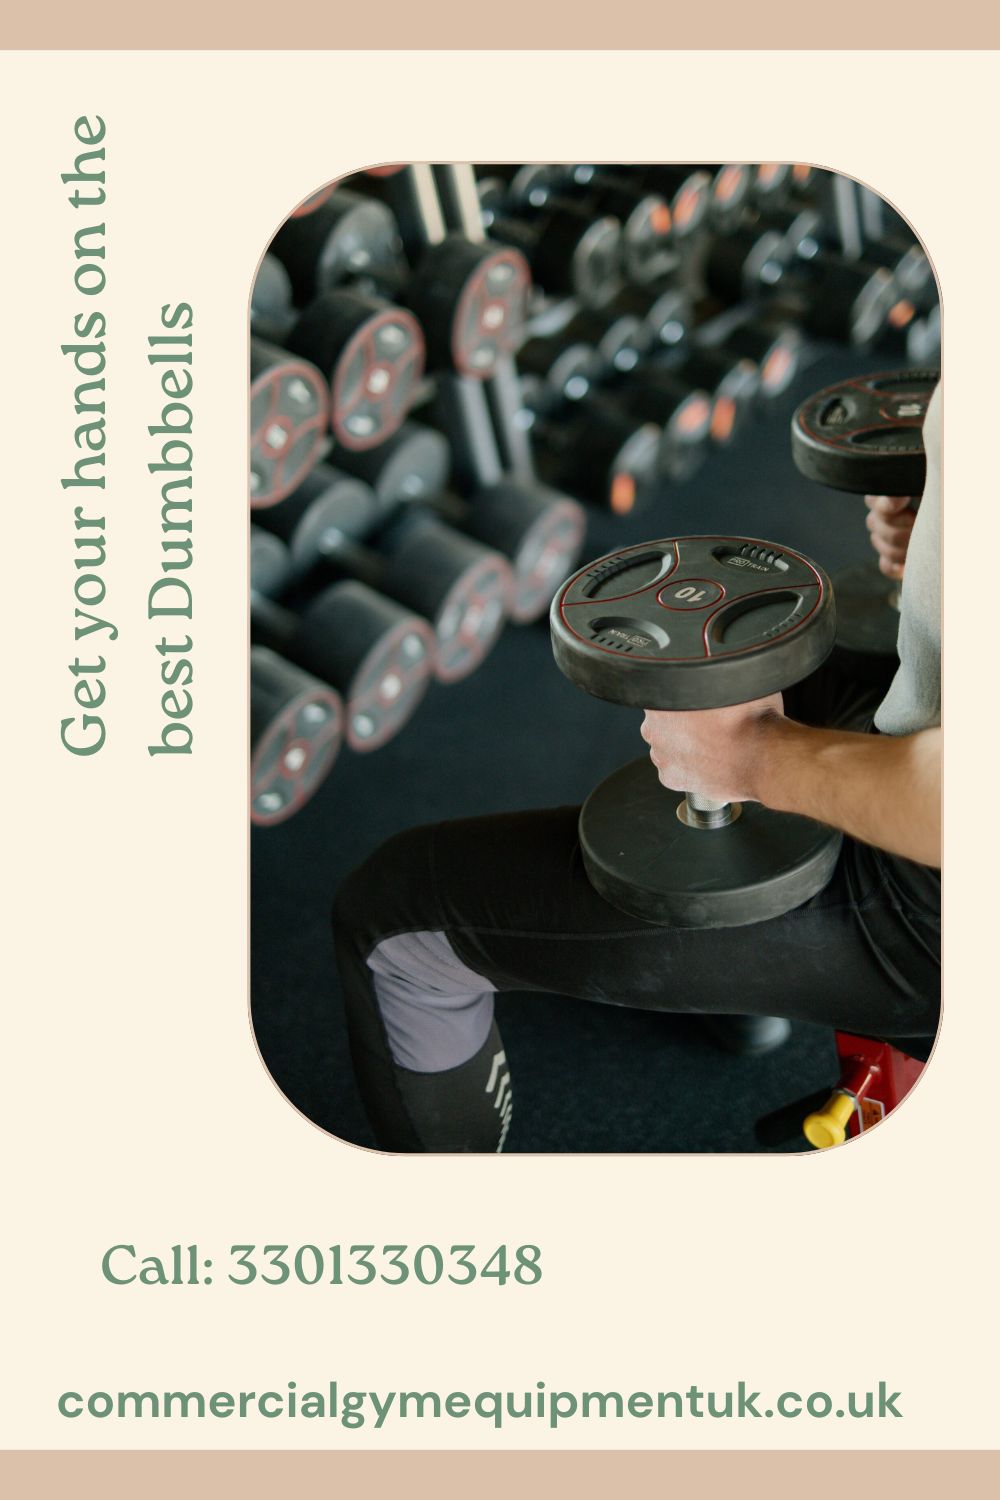 Workout using the best dumbbells